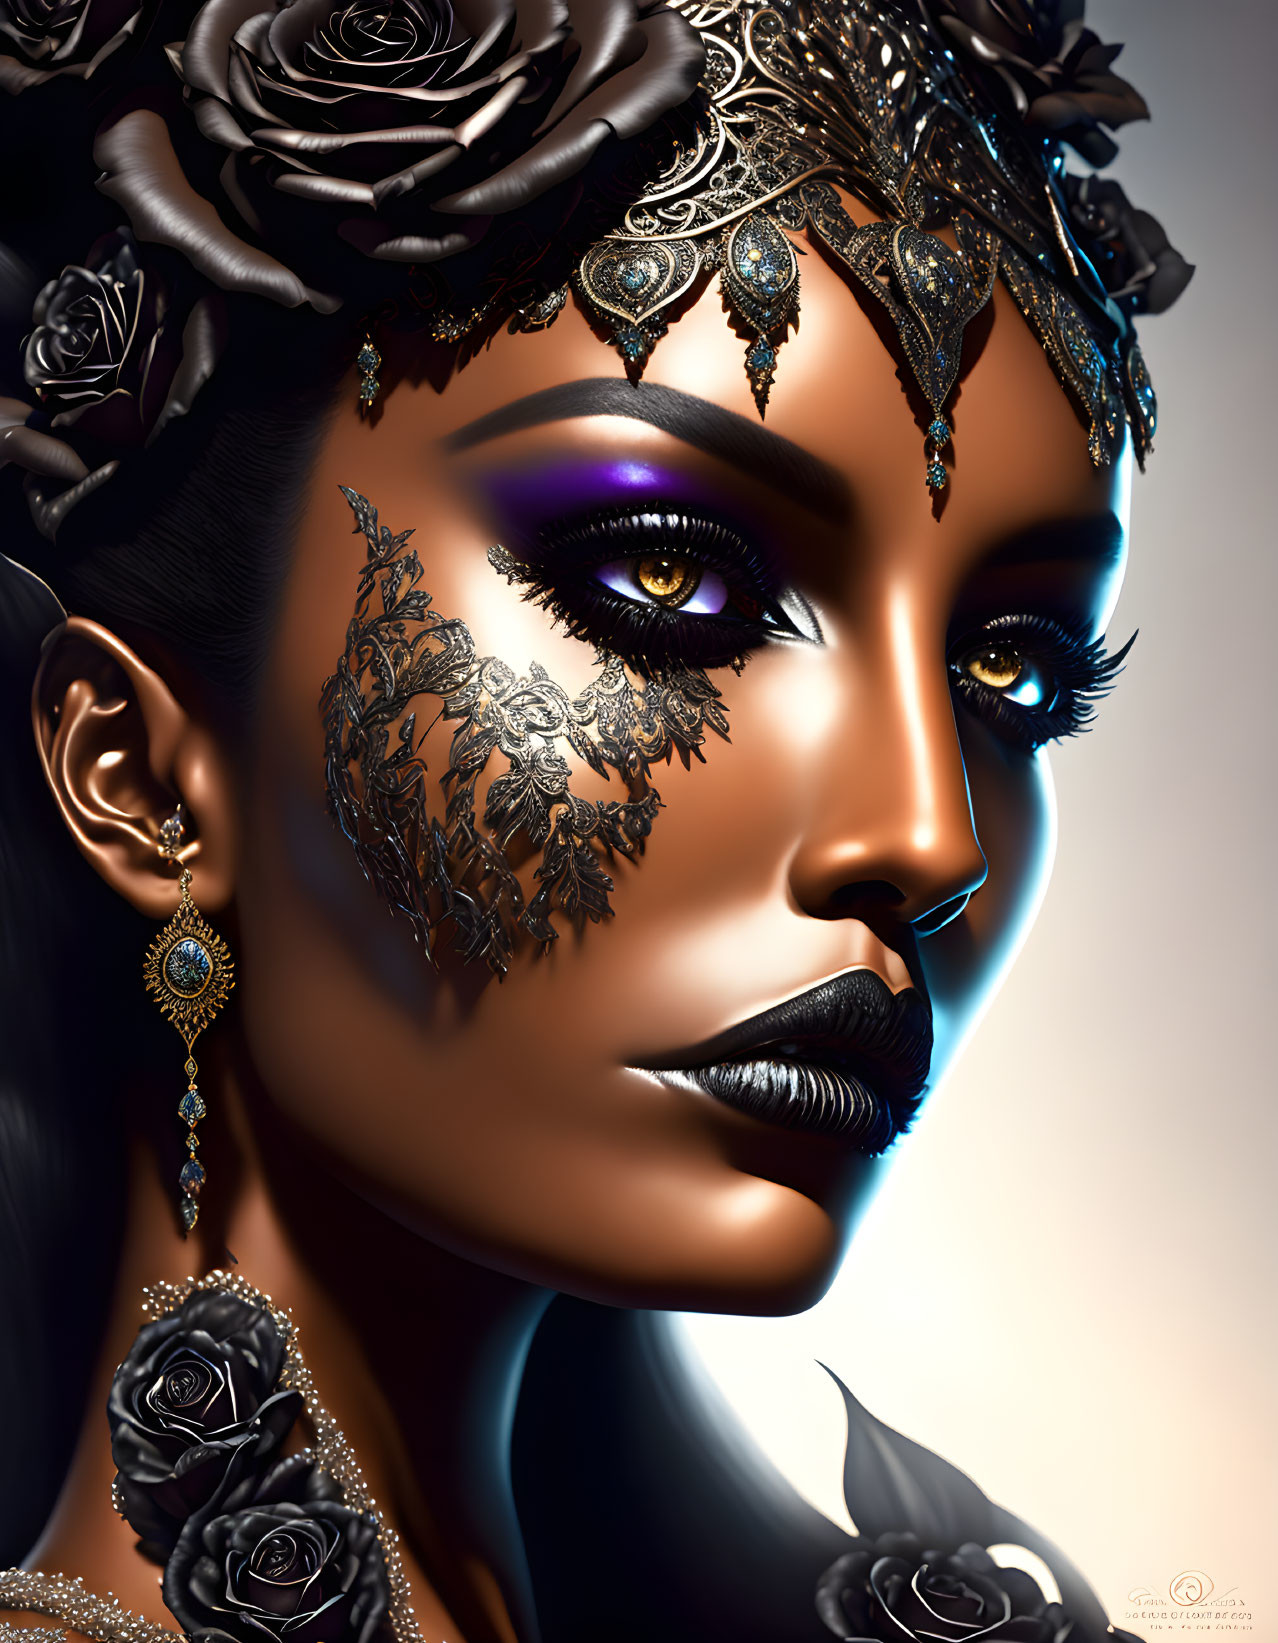 Ornate headpiece and lace tattoo on woman with striking makeup